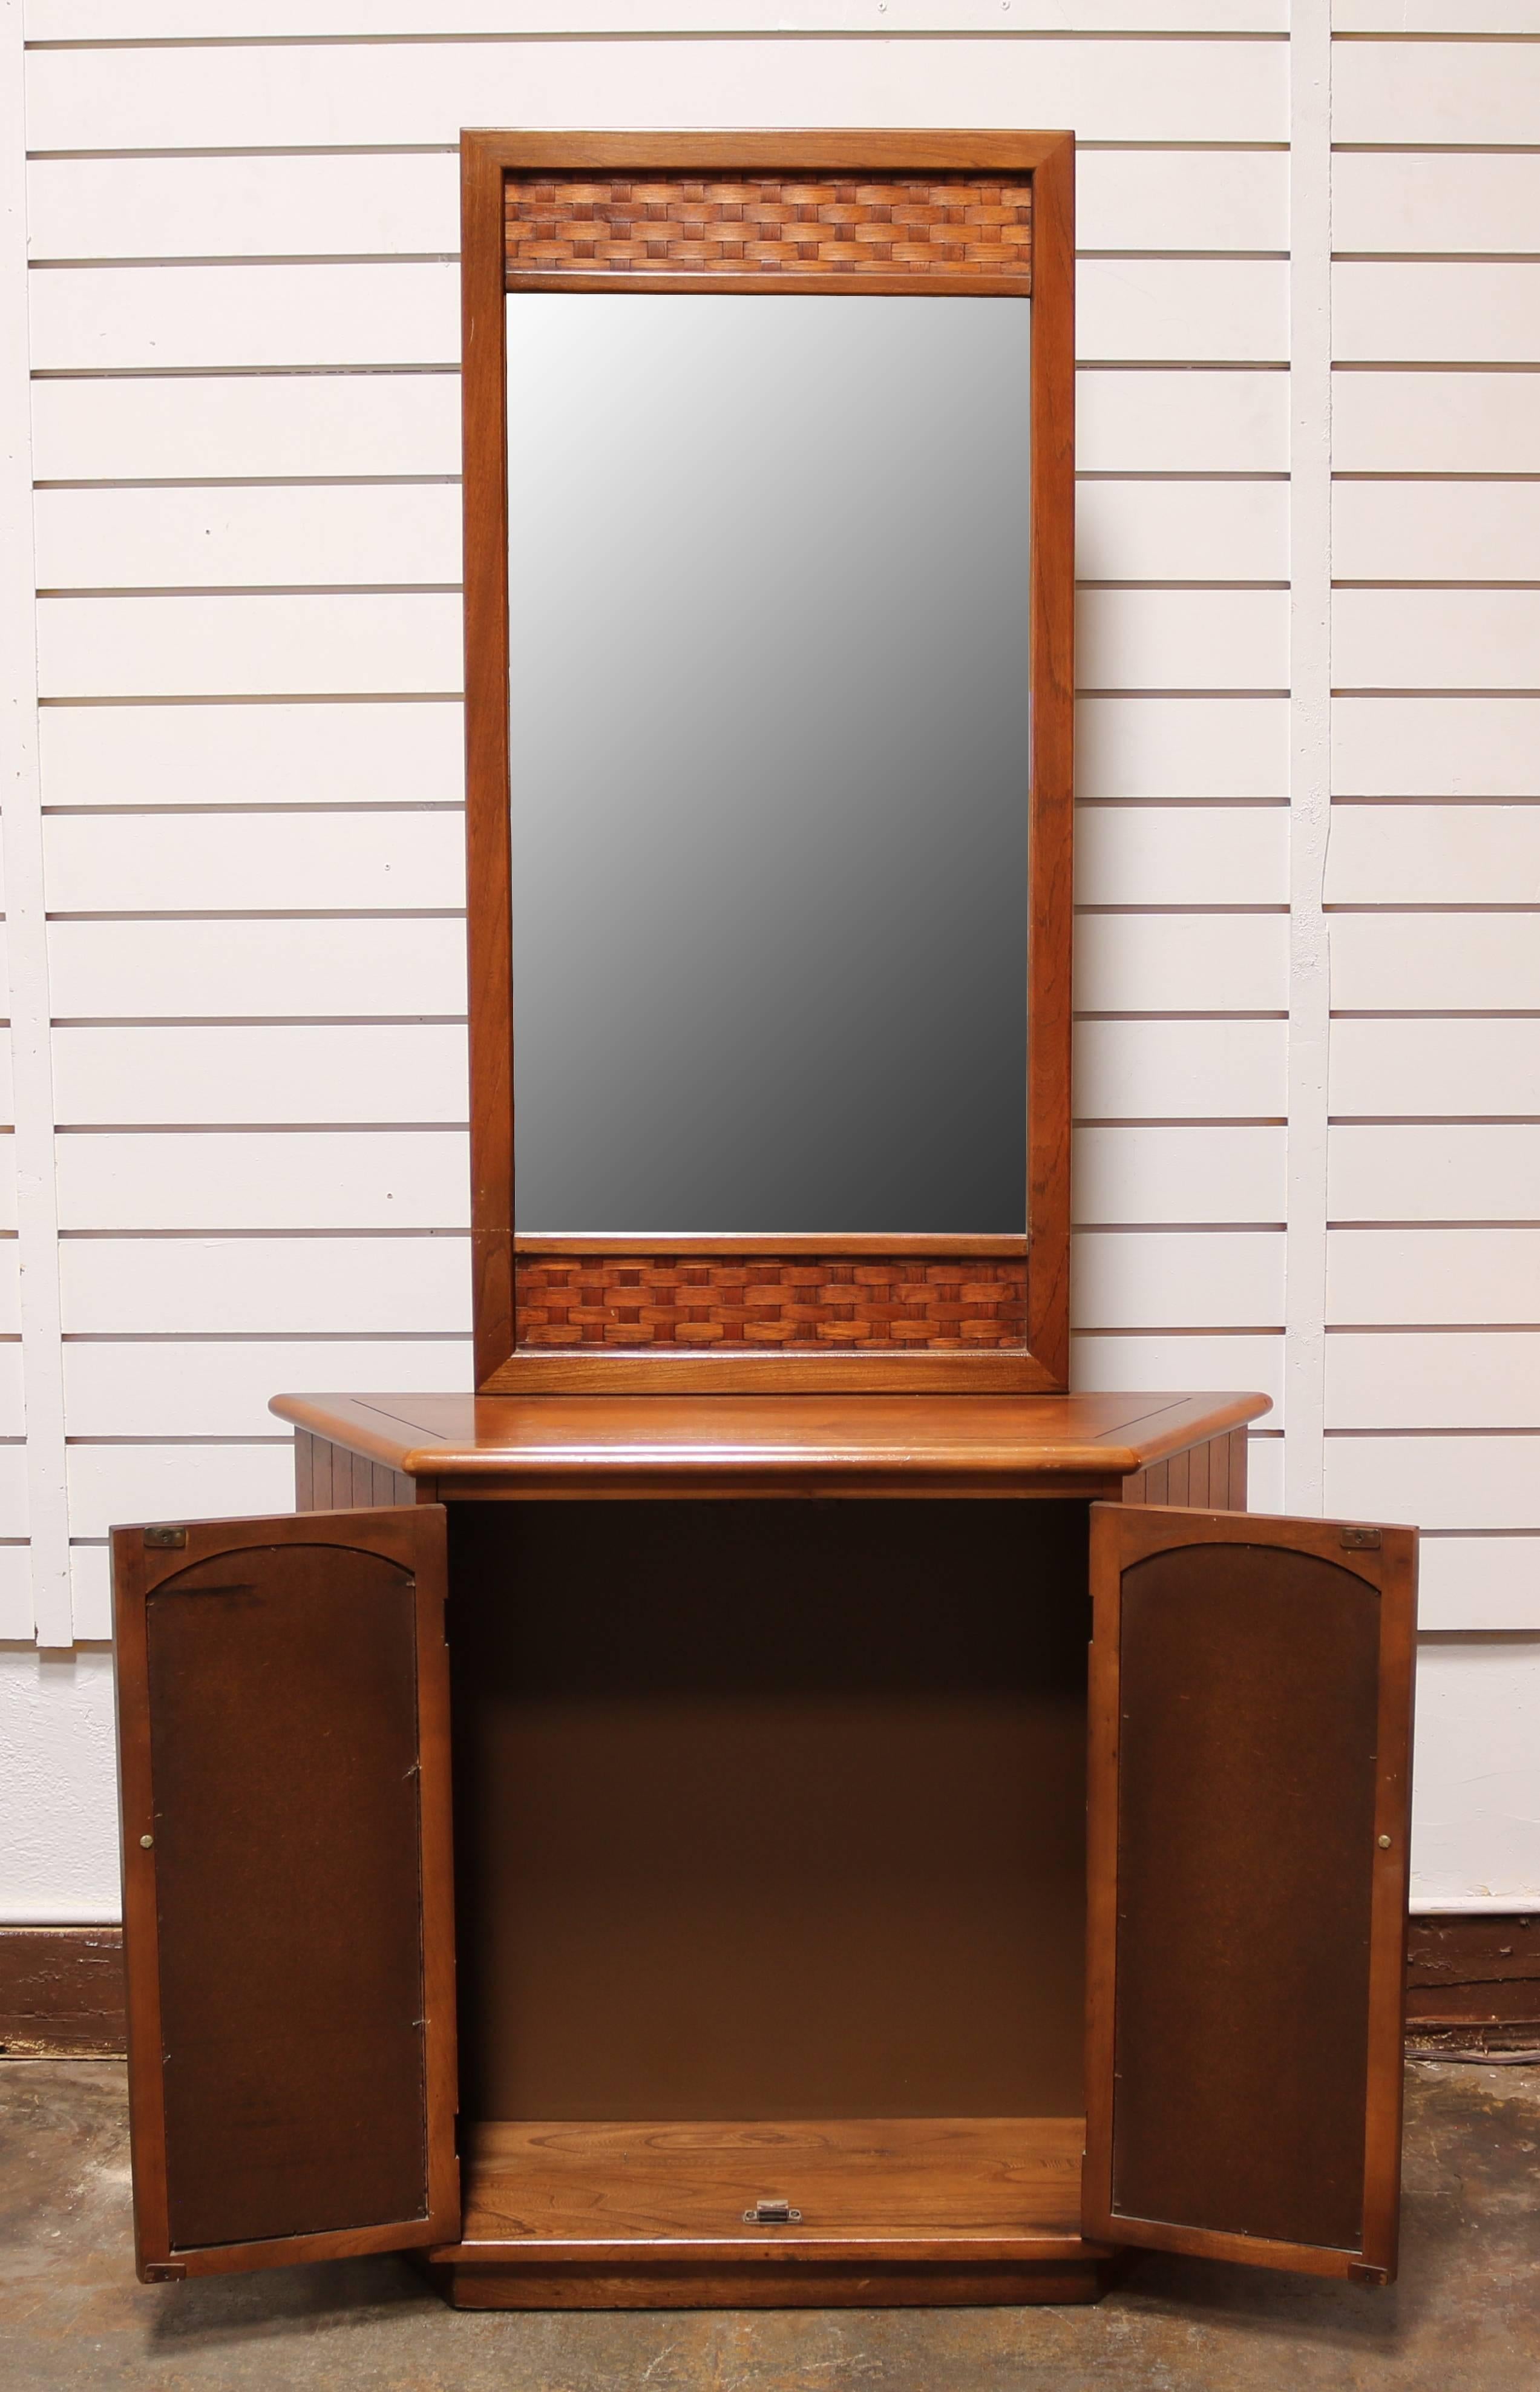 Entryway storage cabinet made of walnut, has a basket-weave detail on doors and around mirror. 



          